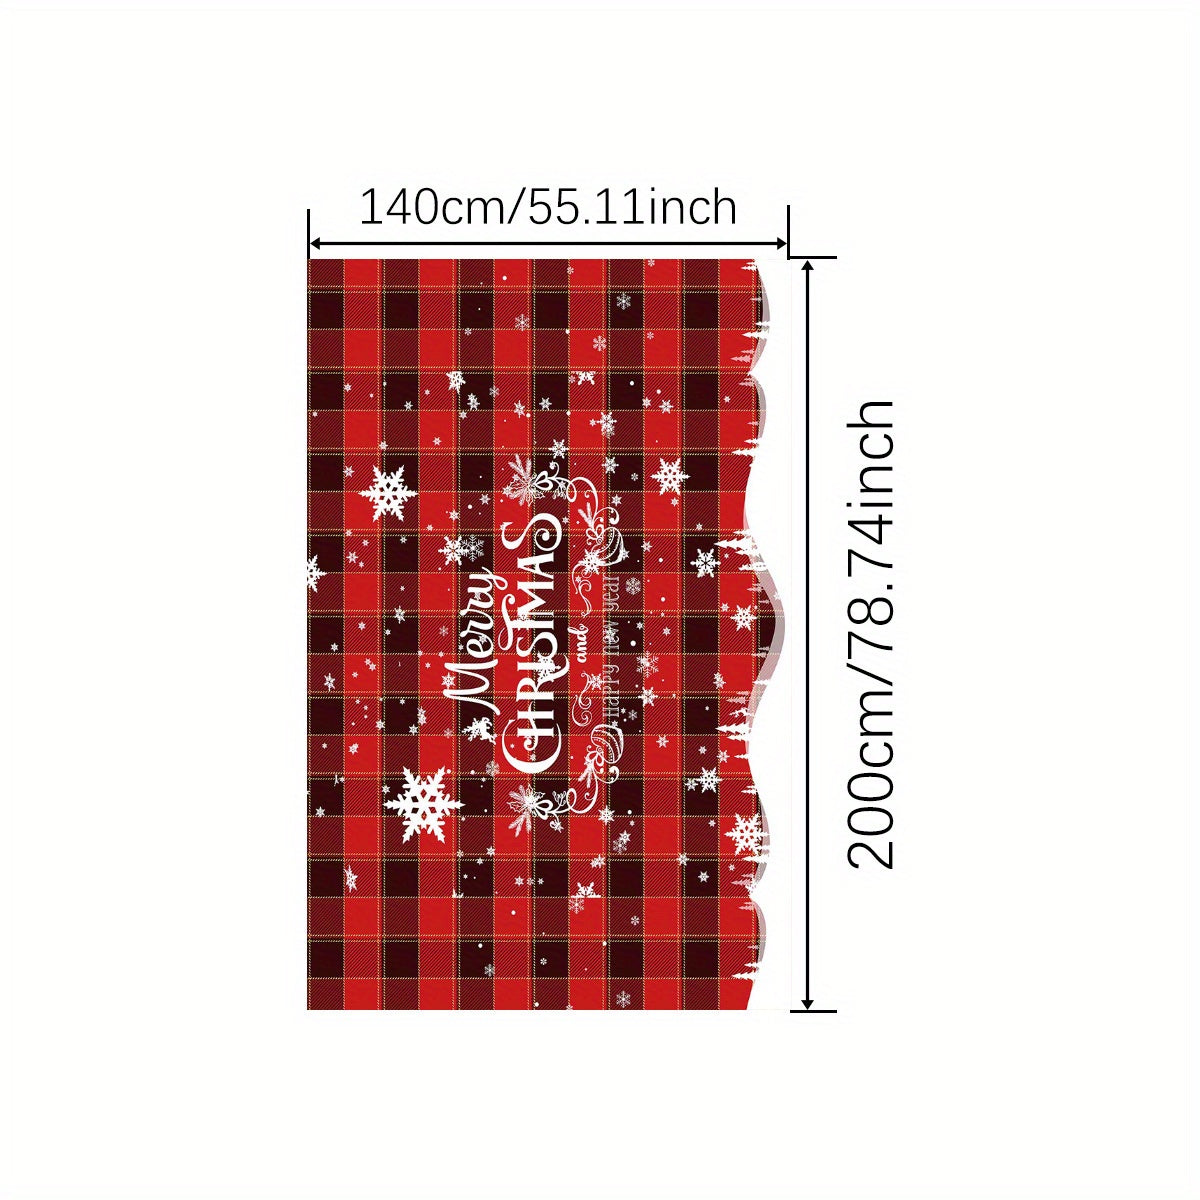 1pc, Polyester Table Cloth, Merry Christmas Table Cover, Red Black Plaid Snowflake Pattern Table Cover, Christmas Atmospheric Tablecloth, Holiday Desktop Decoration Fabric Table Cloth, Home Decoration, Christmas Decor, Gift